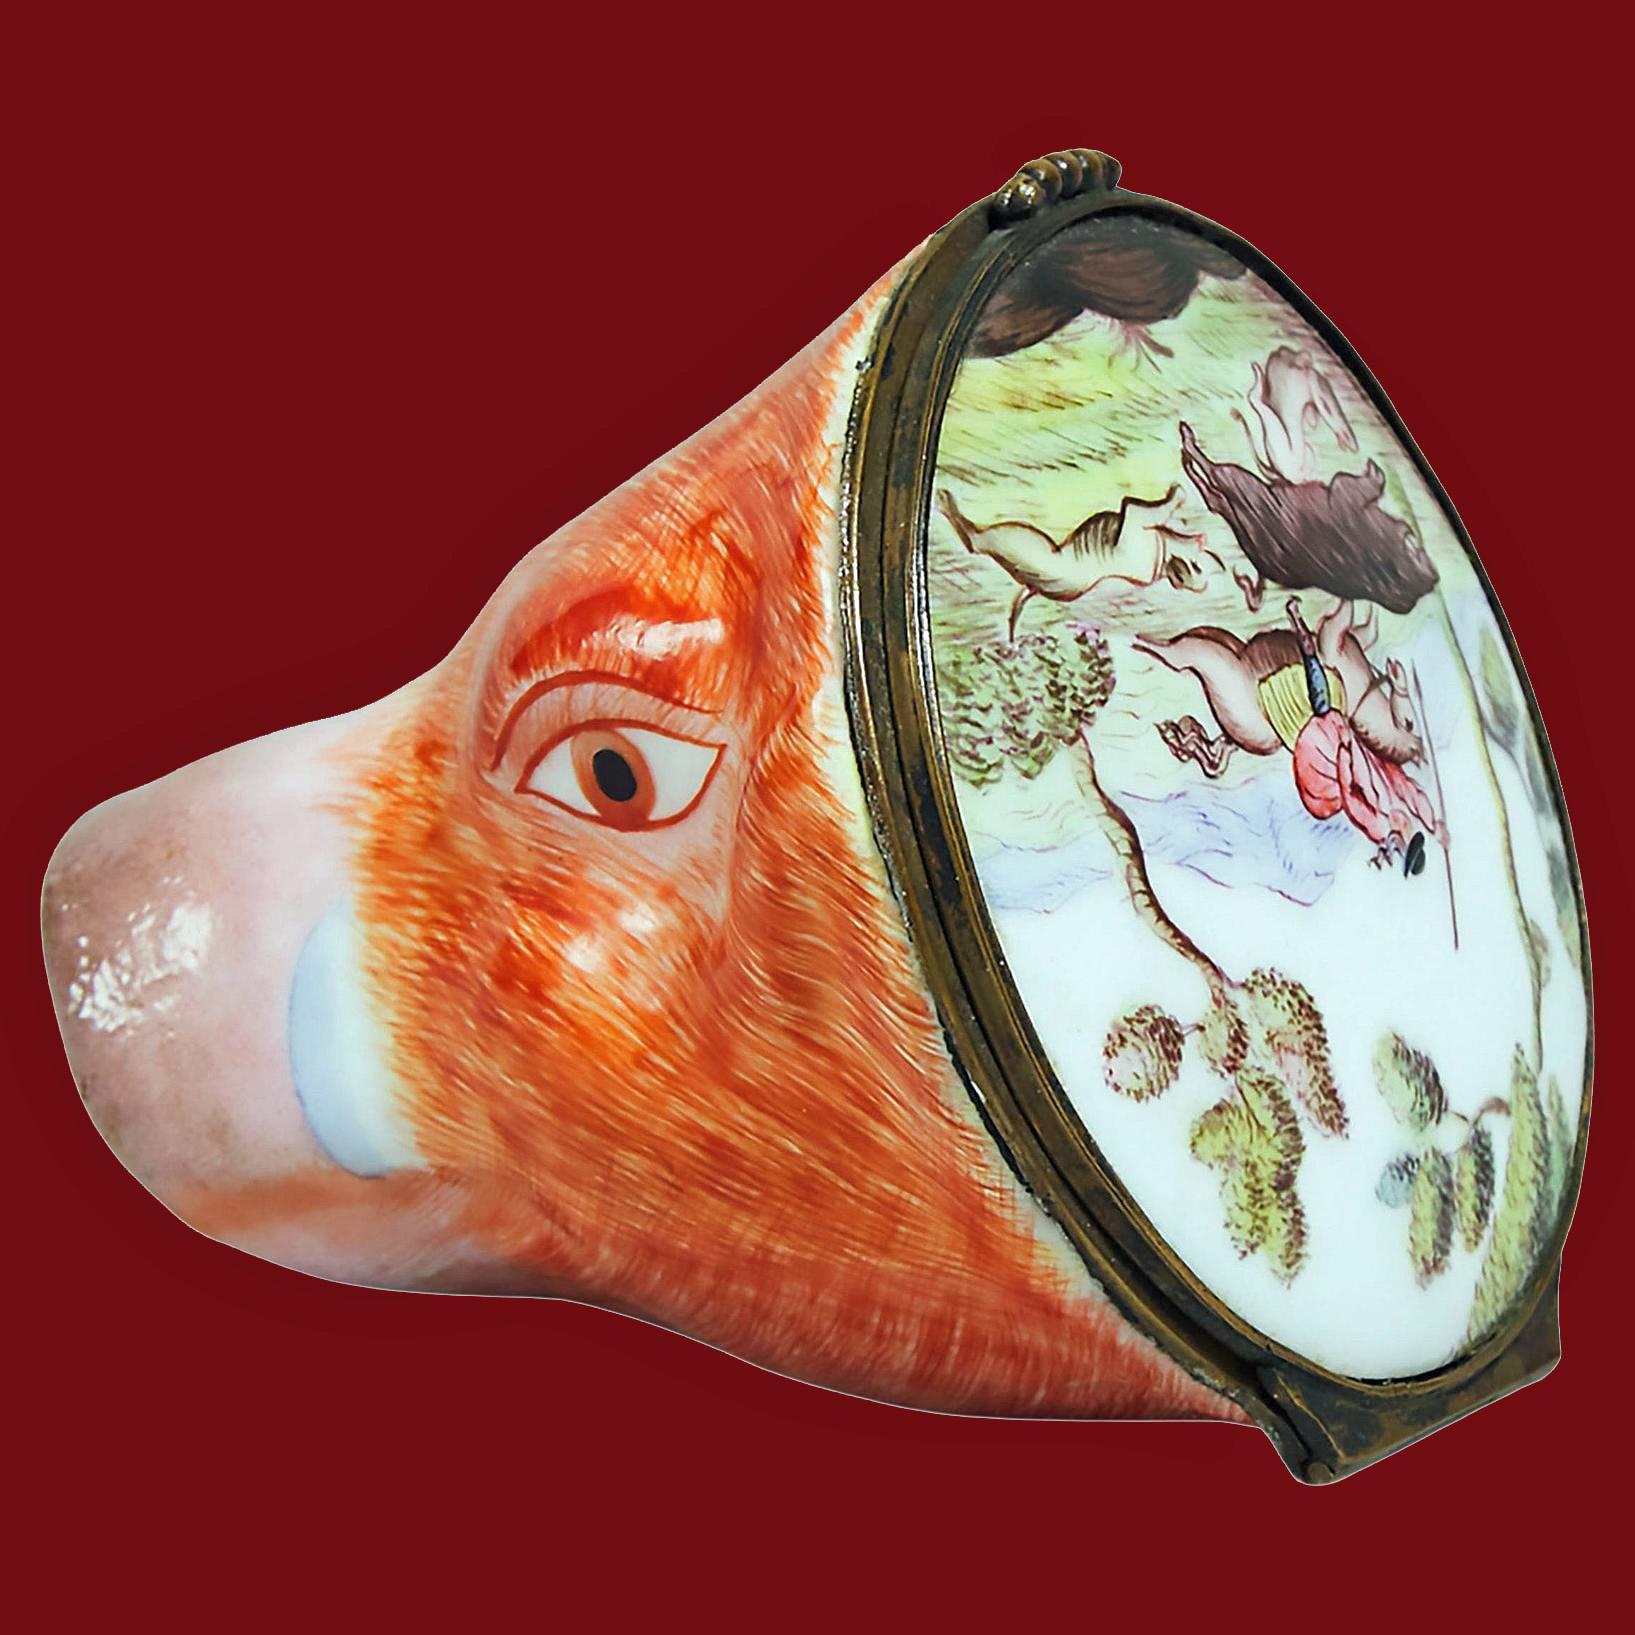 Antique Staffordshire Stirrup cup, rare, covered porcelain Boar's Head form, c. 1870 The cup is exceptionally well coloured and molded with wonderful and rare hinged cover painted enameled scene of a boar hunt. Height: 2.8 inches. Condition: Good no